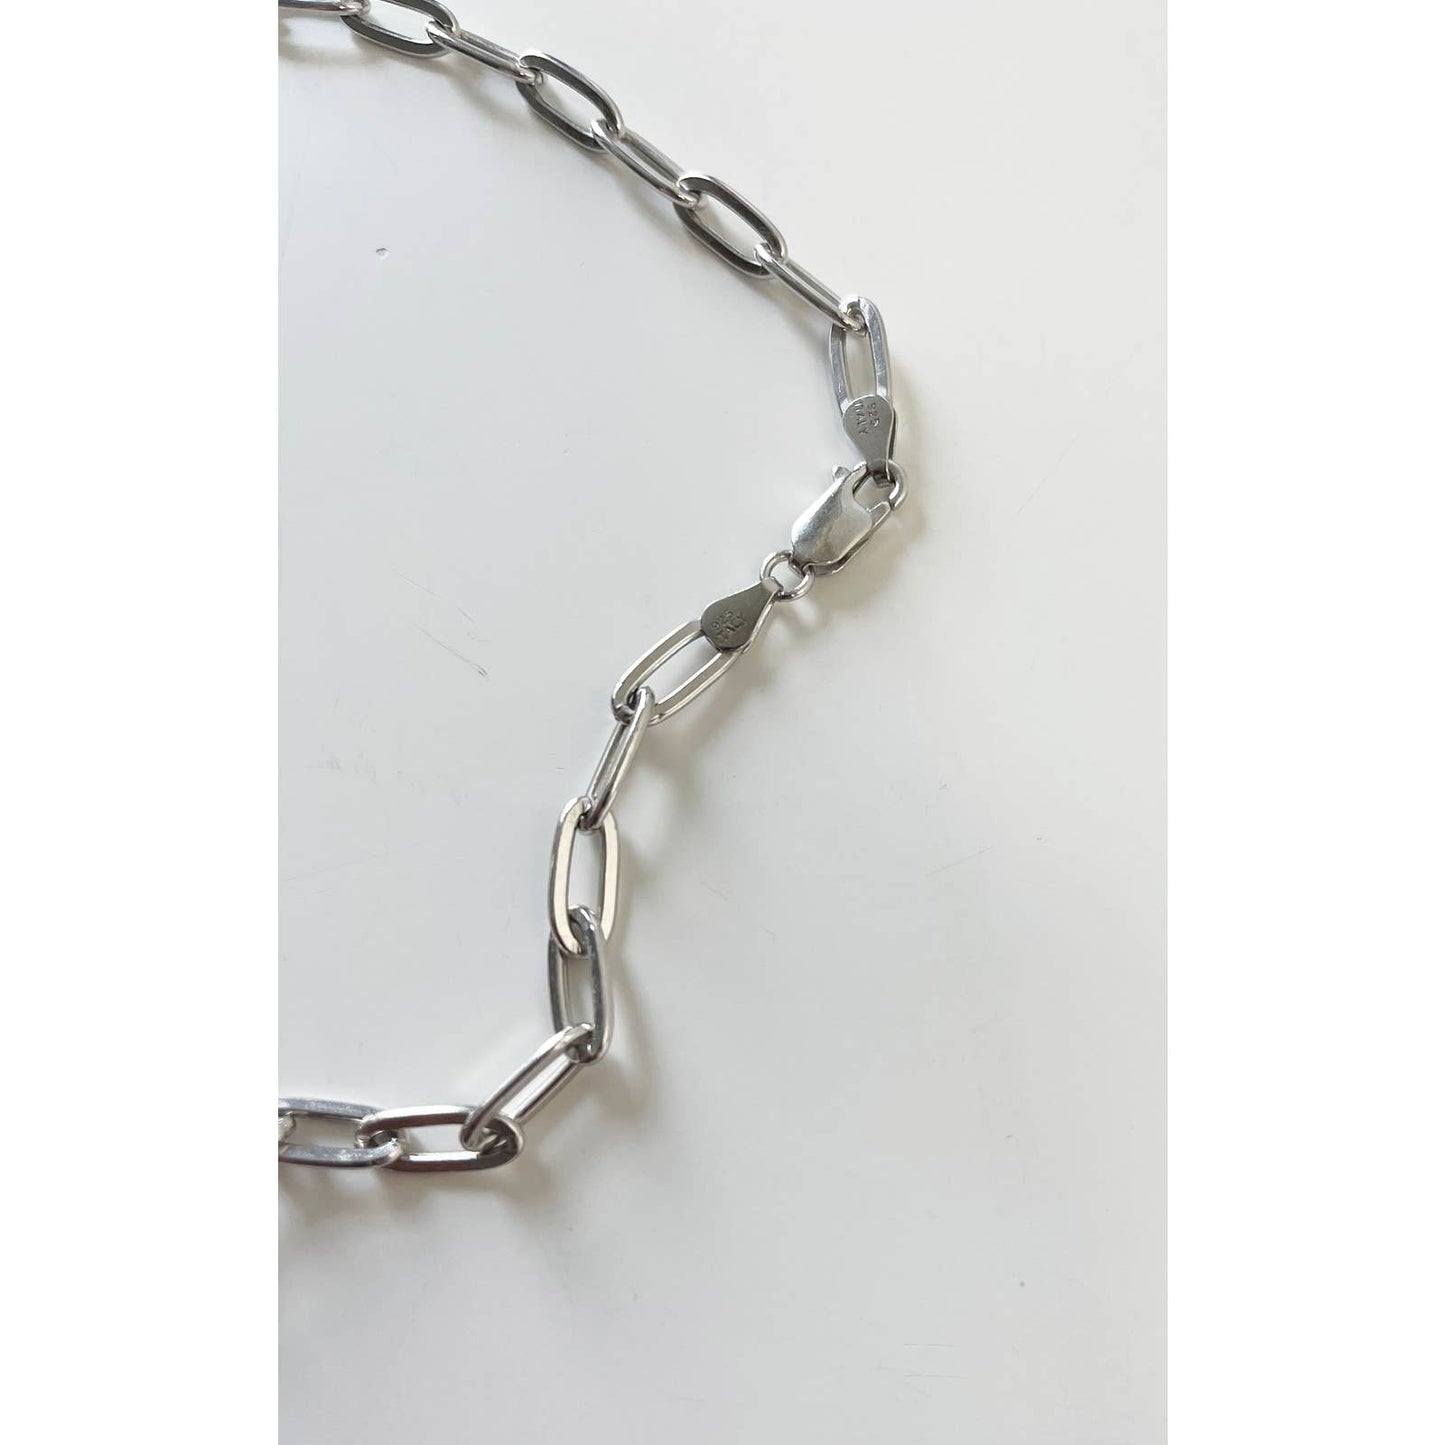 Vintage Watch Charm Necklace | 925 Silver Chain